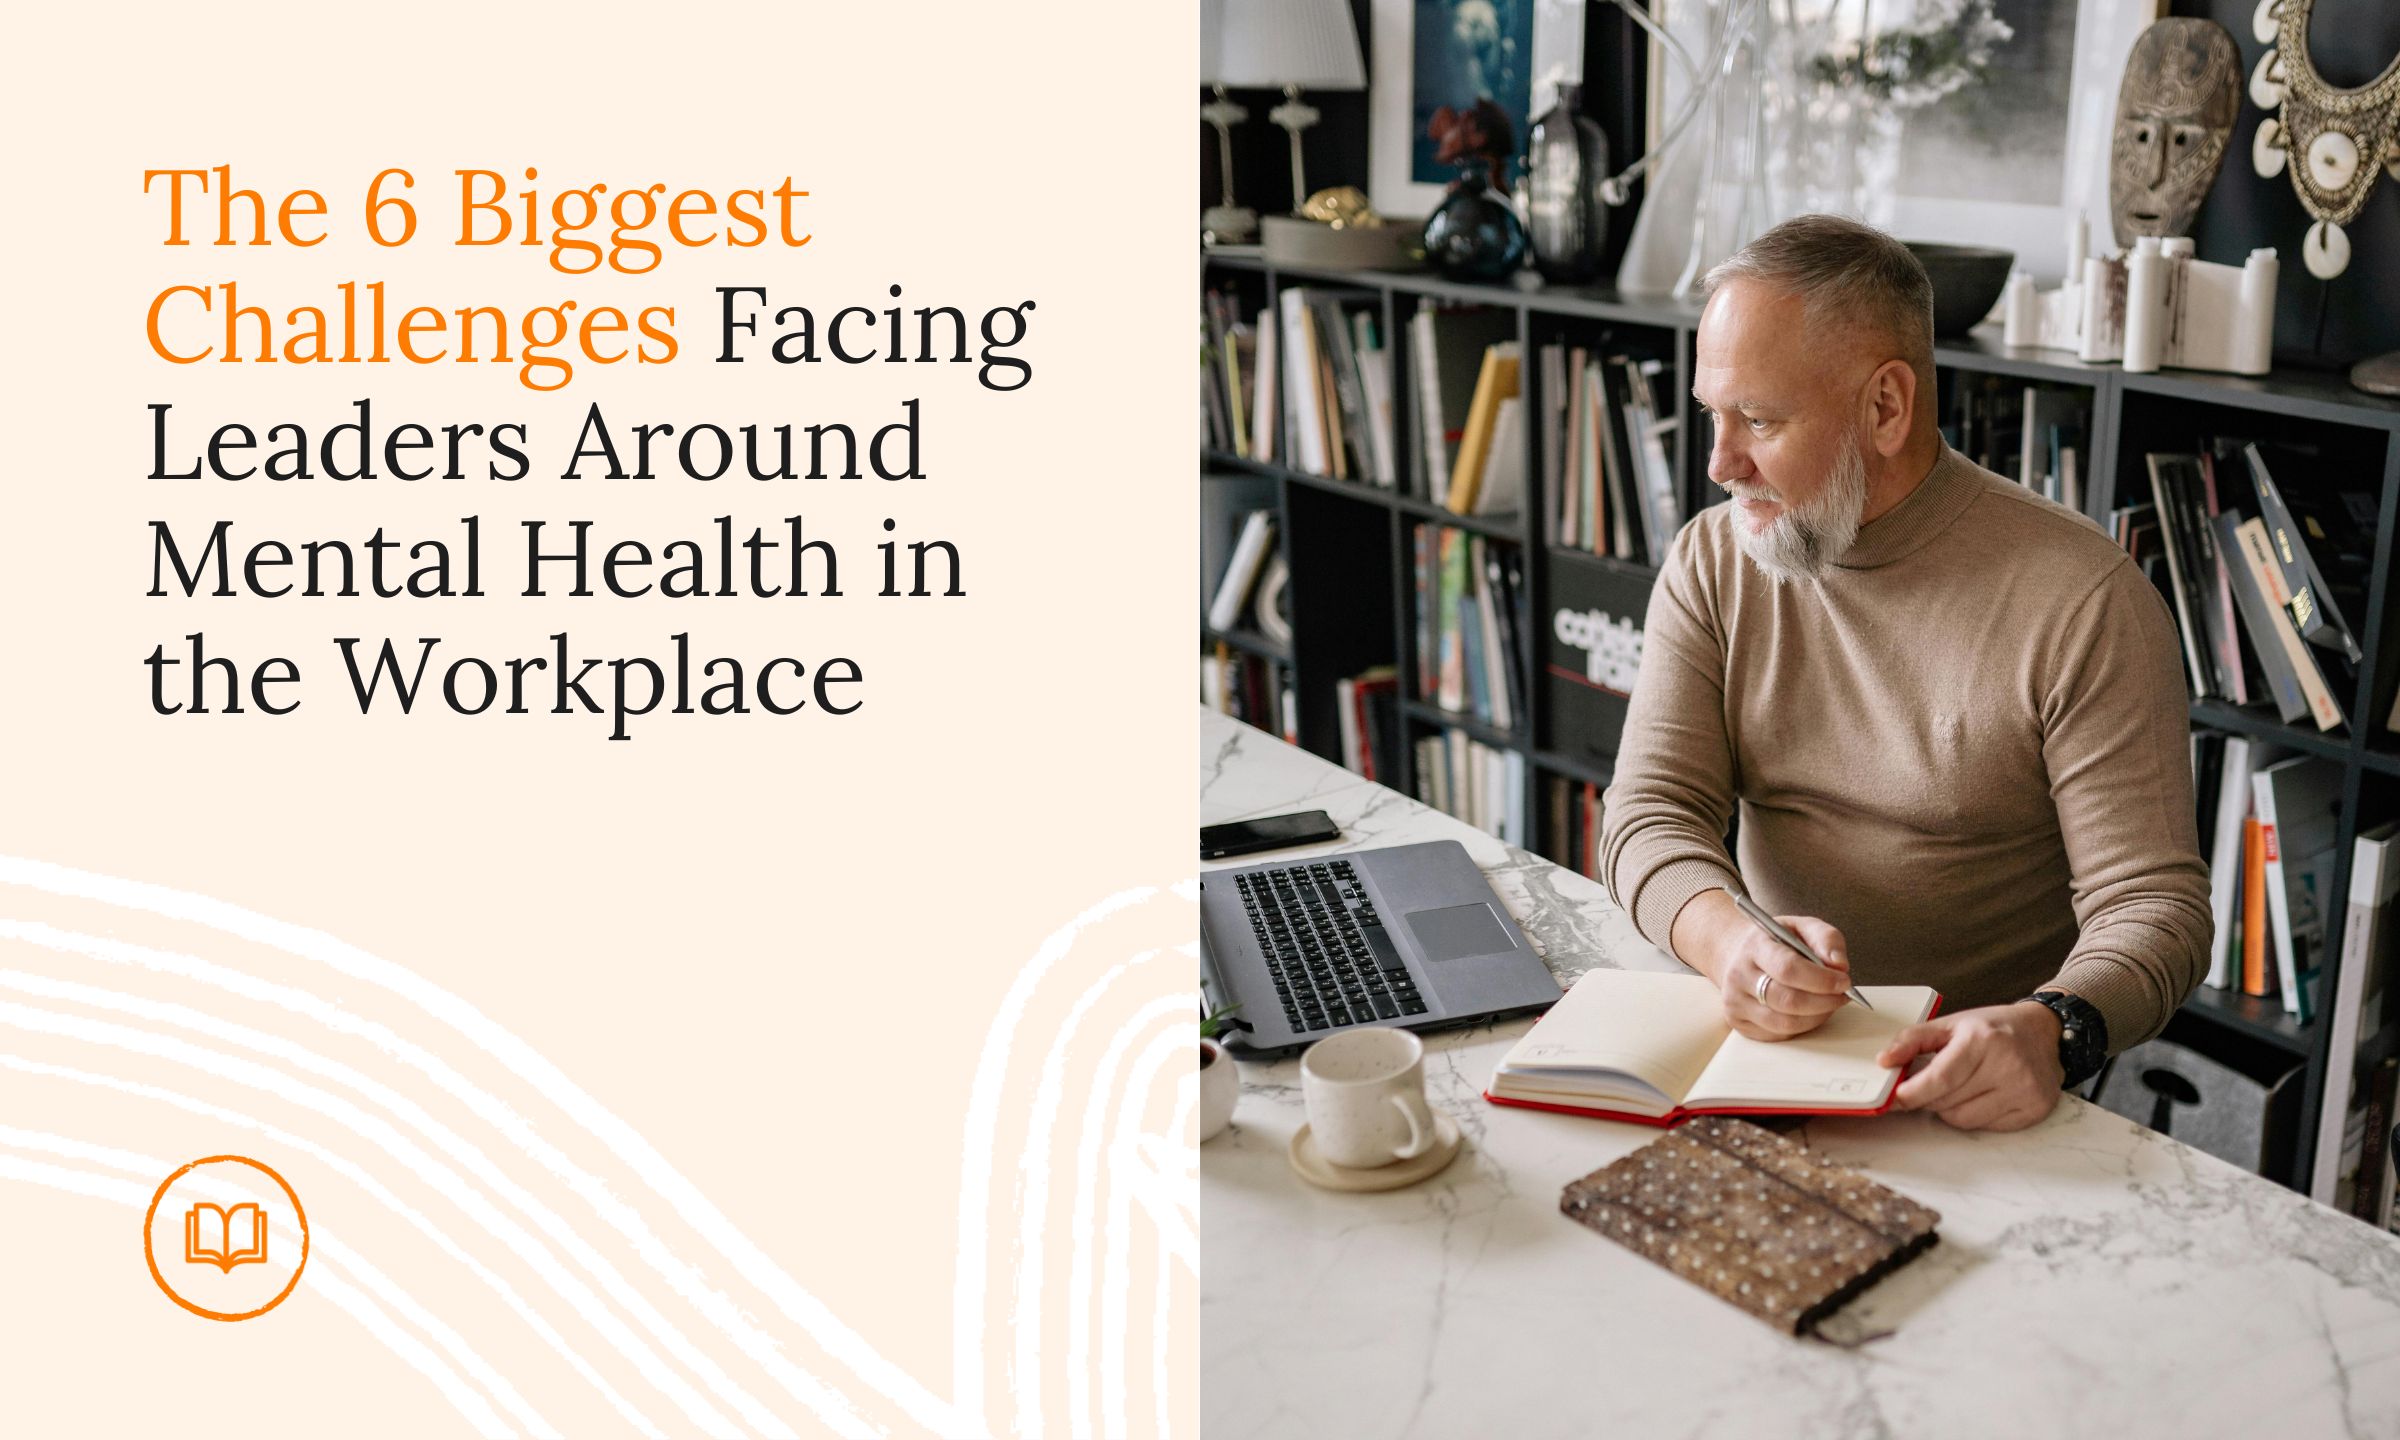 The Six Biggest Challenges Facing Leaders Around Mental Health in the Workplace